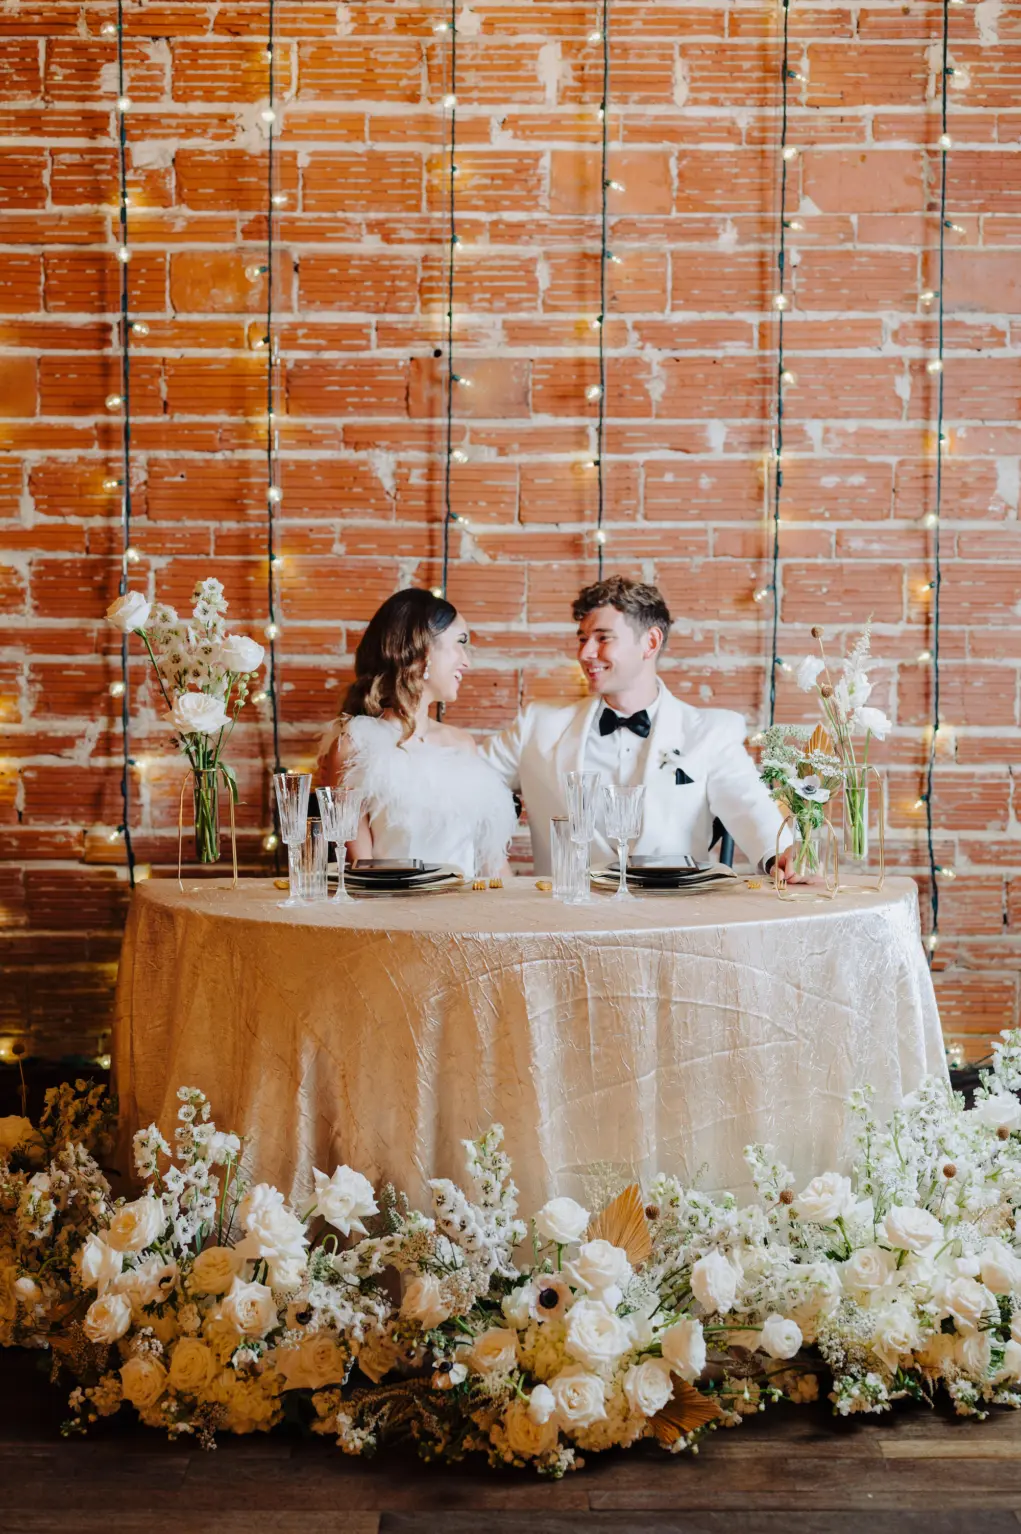 Modern Great Gatsby Themed Wedding Reception Inspiration | Sweetheart Table with Gold Textured Tablecloth | White Stock Flowers, Roses, Anemones, Baby's Breath, and Dried Palm Leaves | Tampa Bay Kate Ryan Rentals | St Petersburg Florist Marigold Flower Co | Planner Kelci Leigh Events | Venue NOVA 535